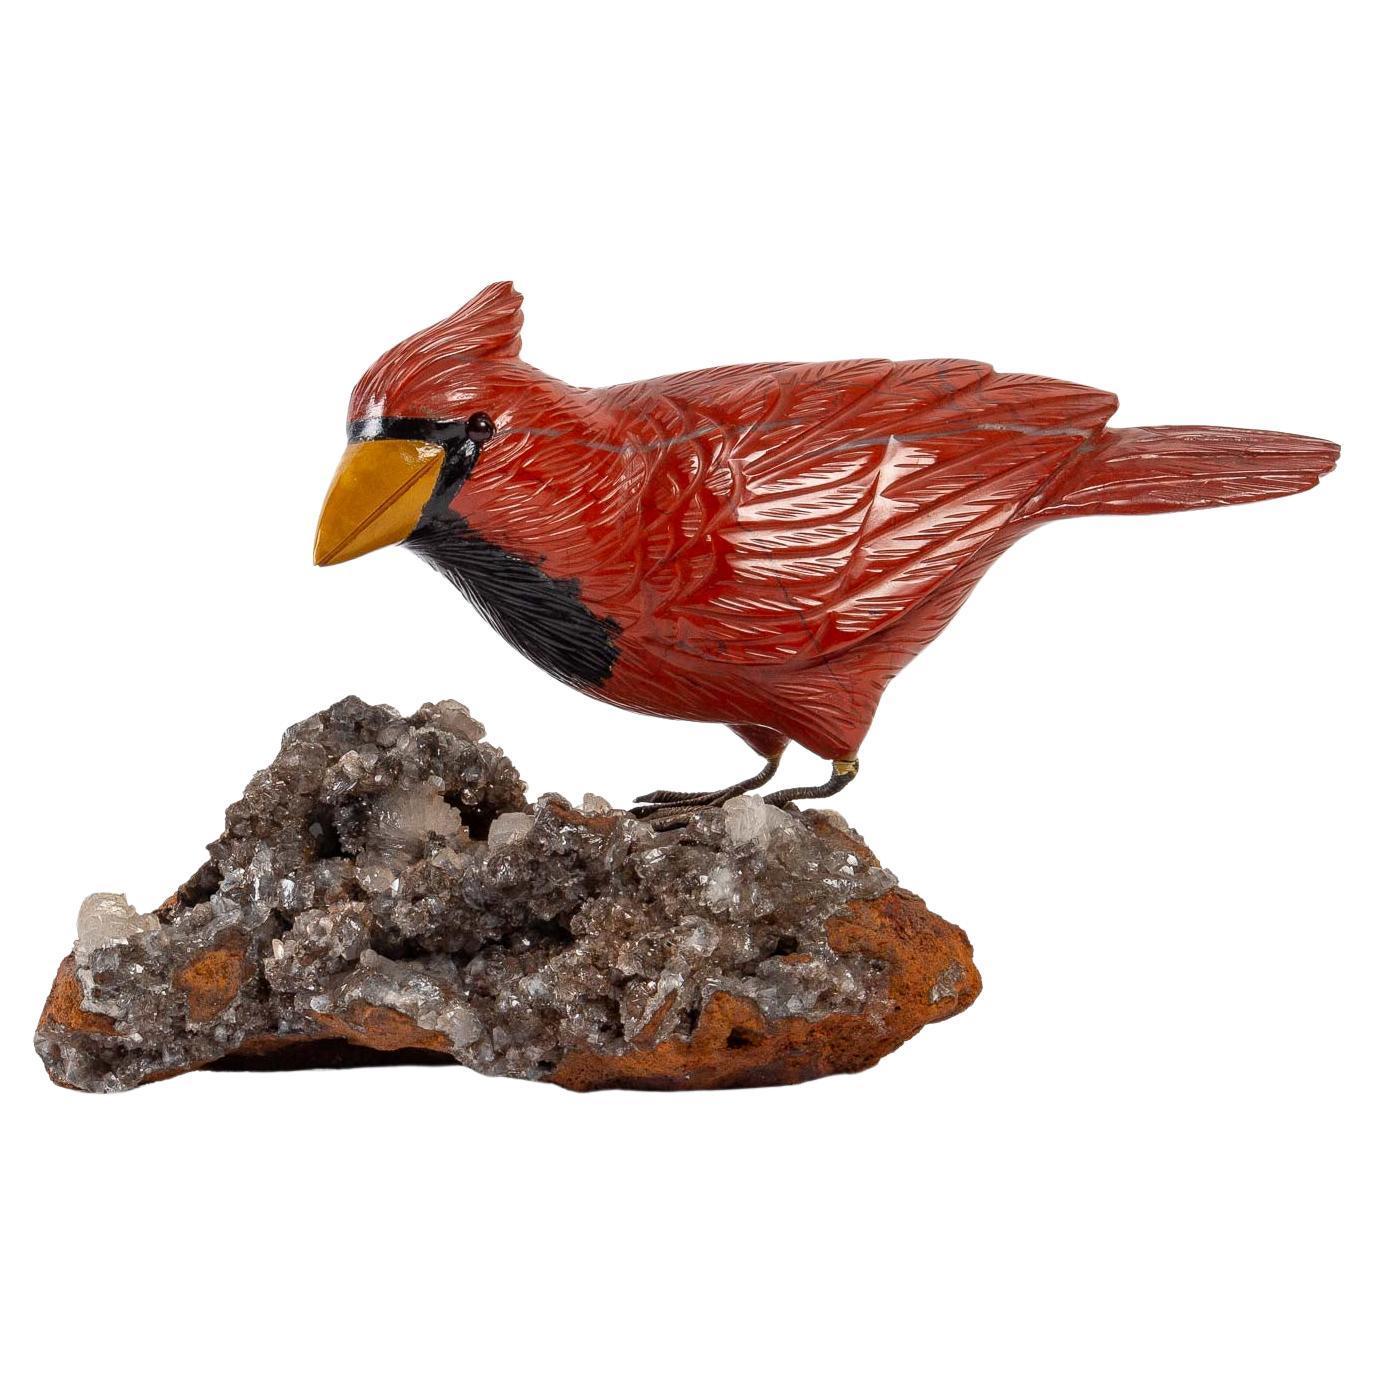 Carved marble bird resting on a rock with rough crystals, 20th century.
Measures: H: 12 cm, W: 19 cm, D: 9 cm.